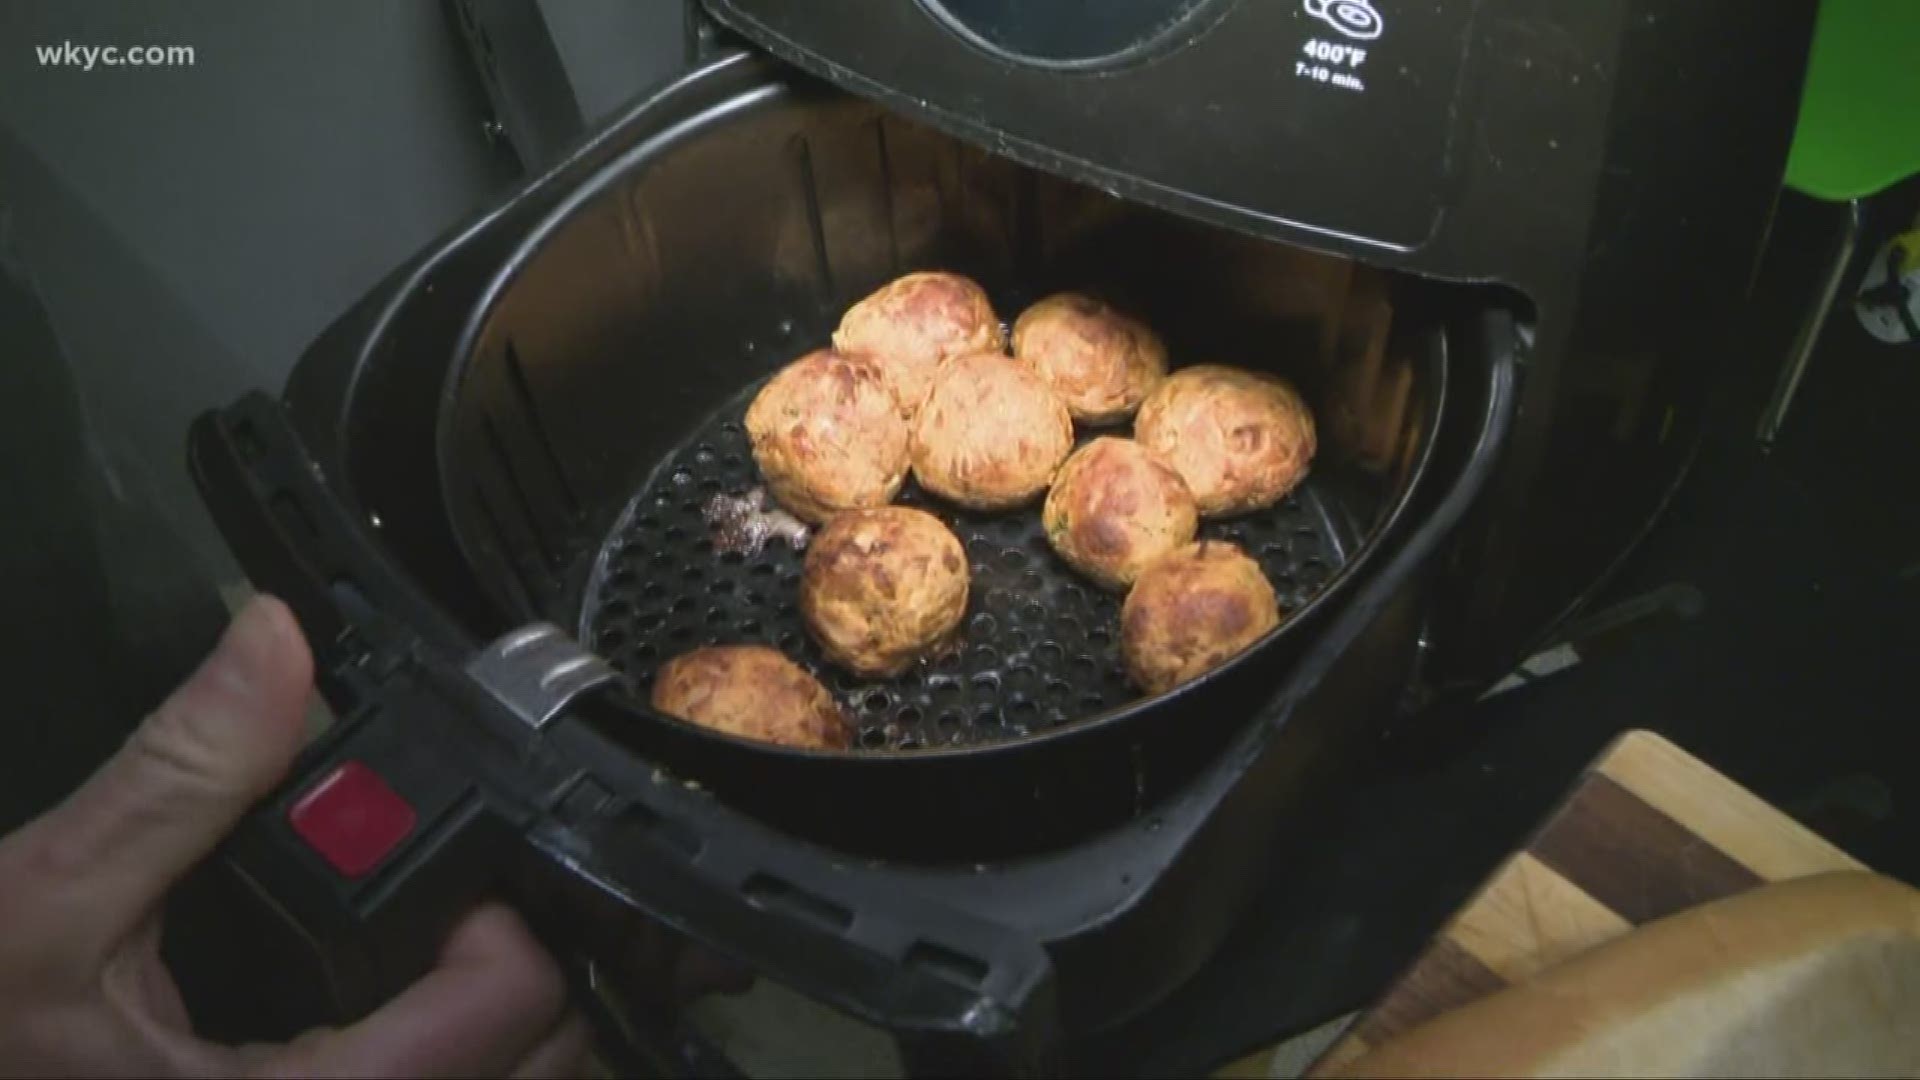 Feb. 5, 2020: This recipe will surprise your entire family because these meatballs have no meat in them at all. Here's how to make a vegan meatball at home.